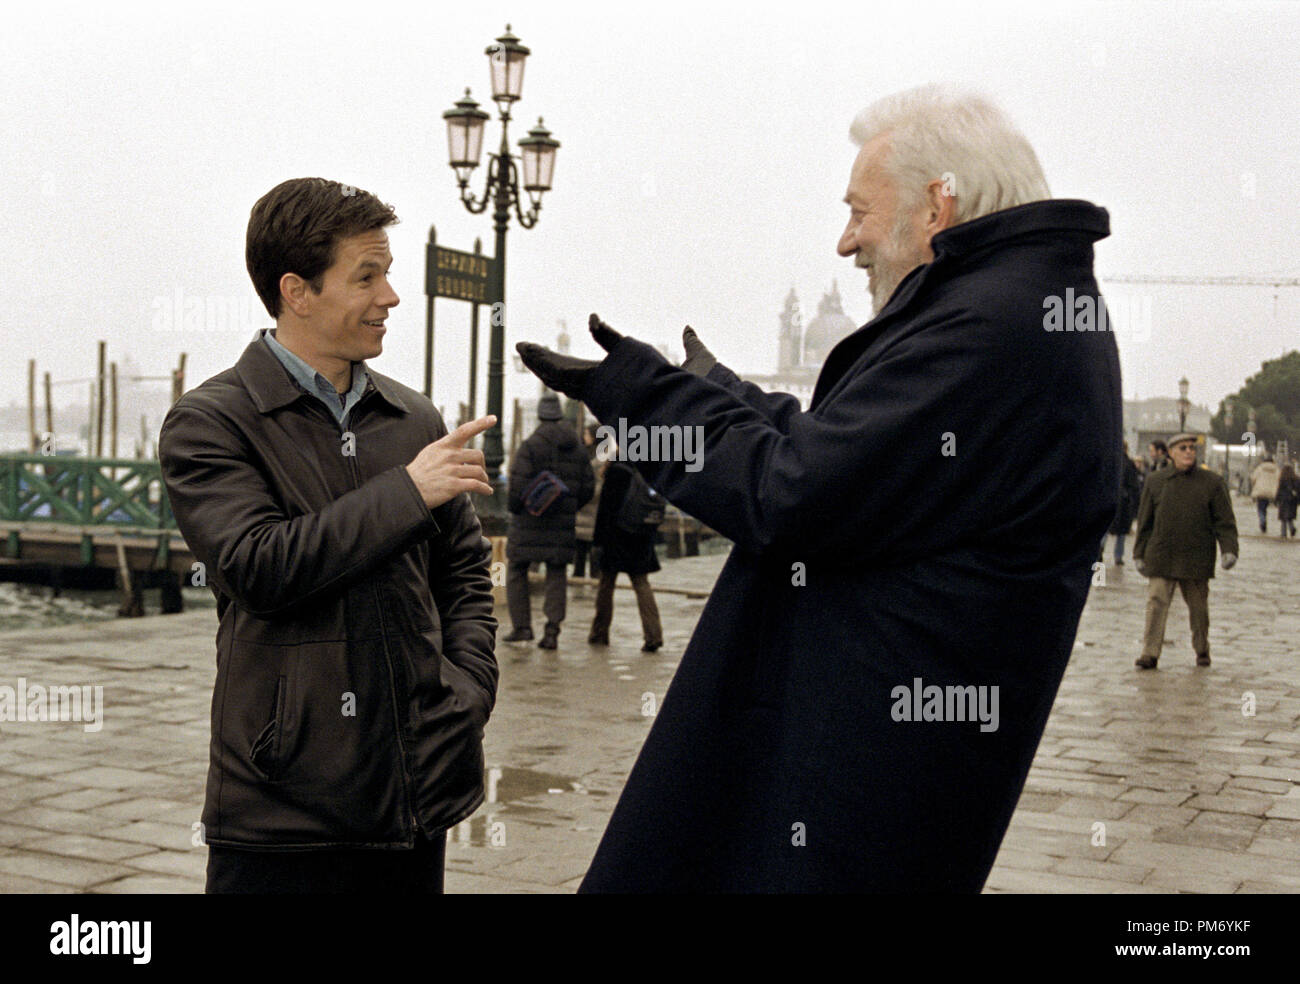 Studio Publicity Still from 'The Italian Job' Mark Wahlberg, Donald Sutherland © 2003 Paramount Photo by Claudette Barius File Reference # 307531025THA  For Editorial Use Only -  All Rights Reserved Stock Photo